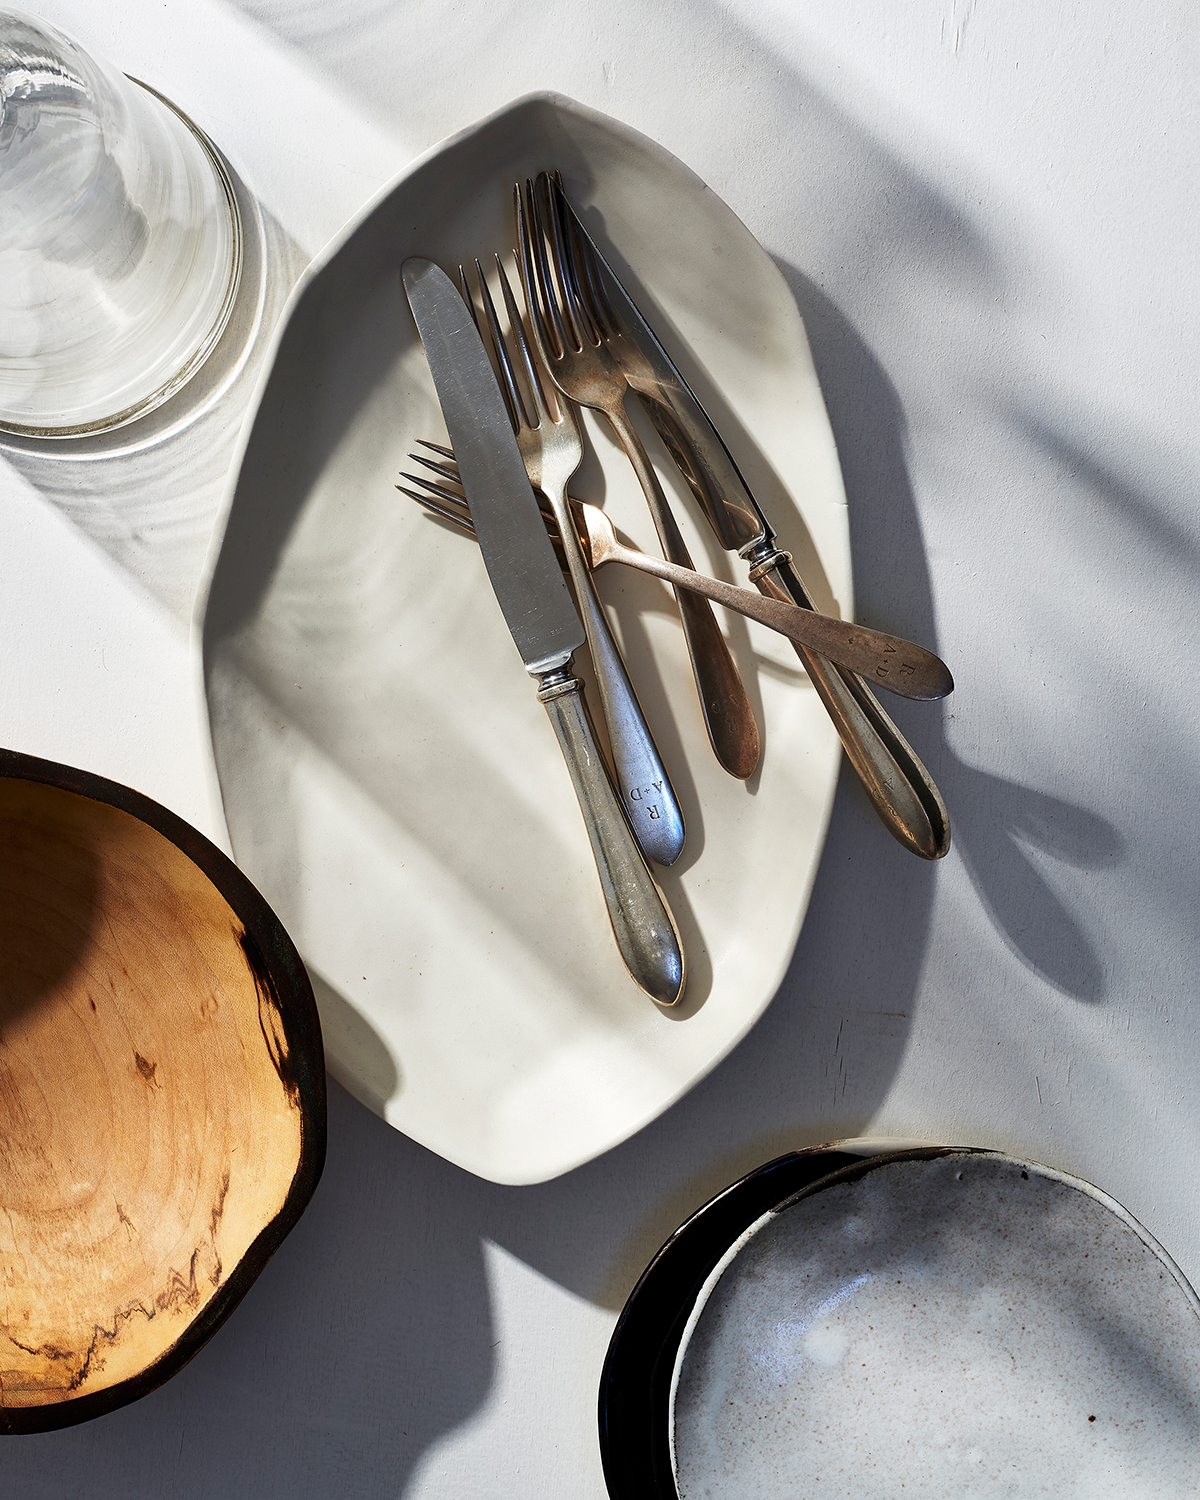 Serving dishes plates and utensils in shadows  Still-life by Alison Gootee Photography